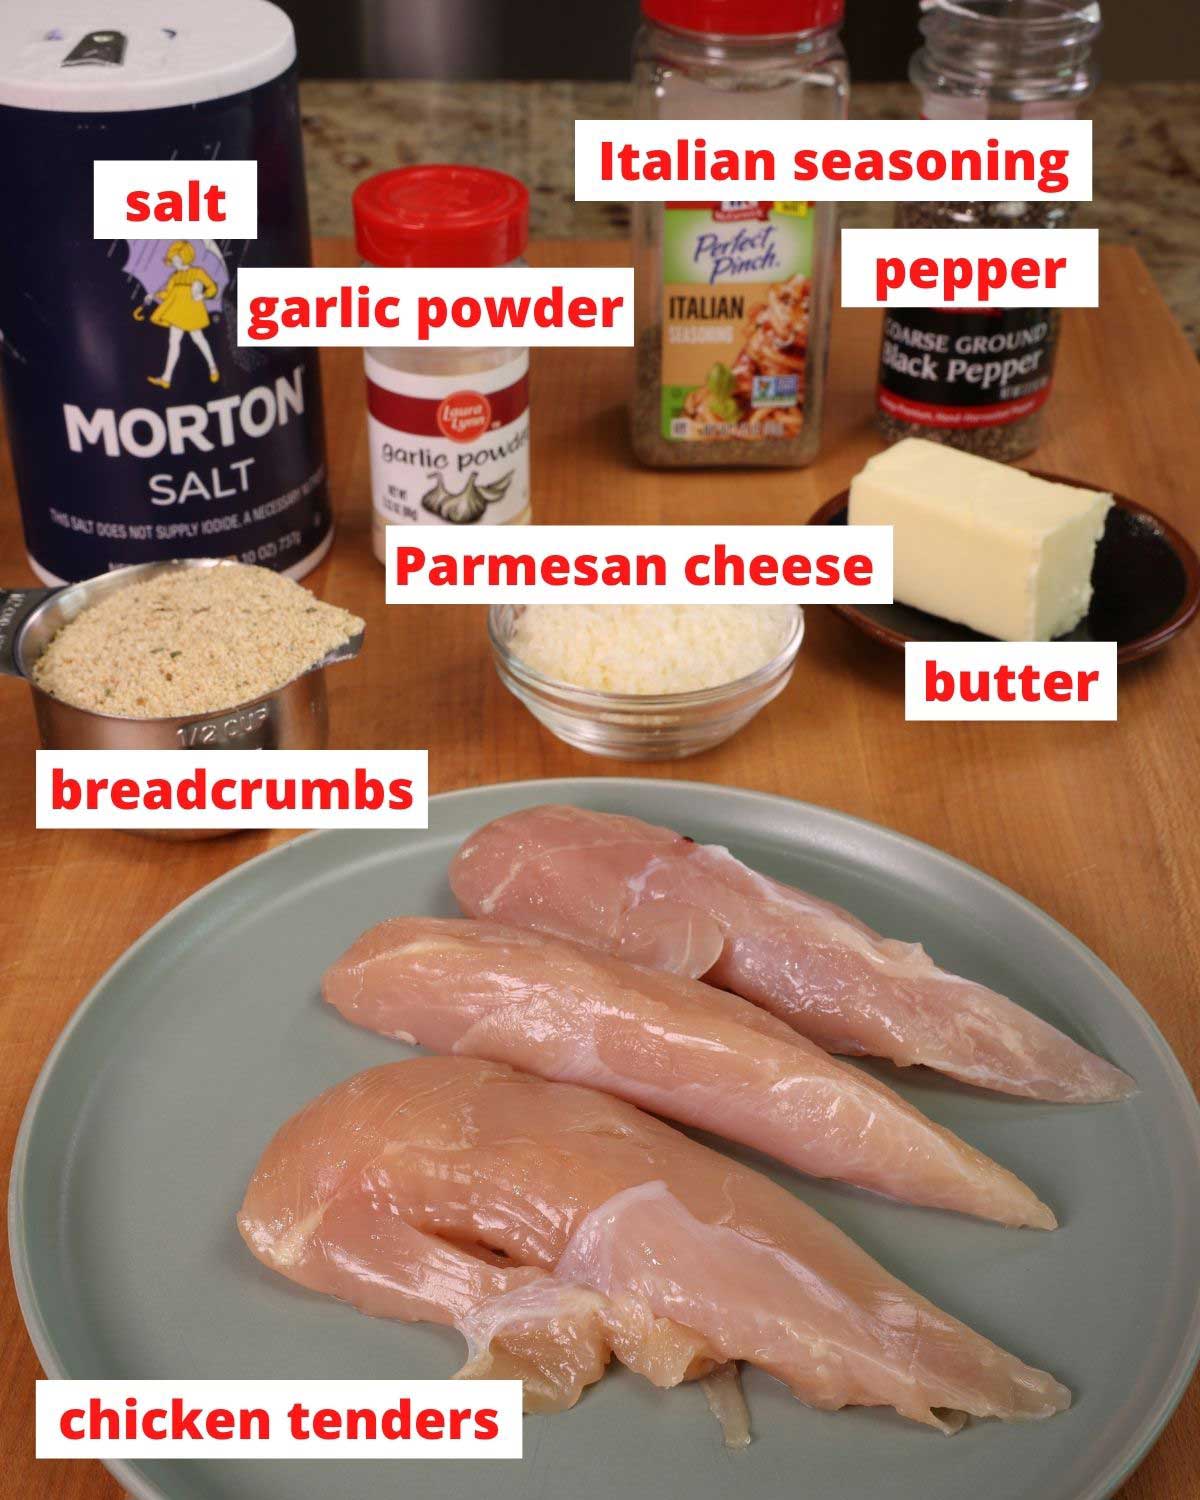 three strips of chicken on a green plate next to a bowl of breadcrumbs, parmesan cheese, butter and jars of salt, pepper, and italian seasoning